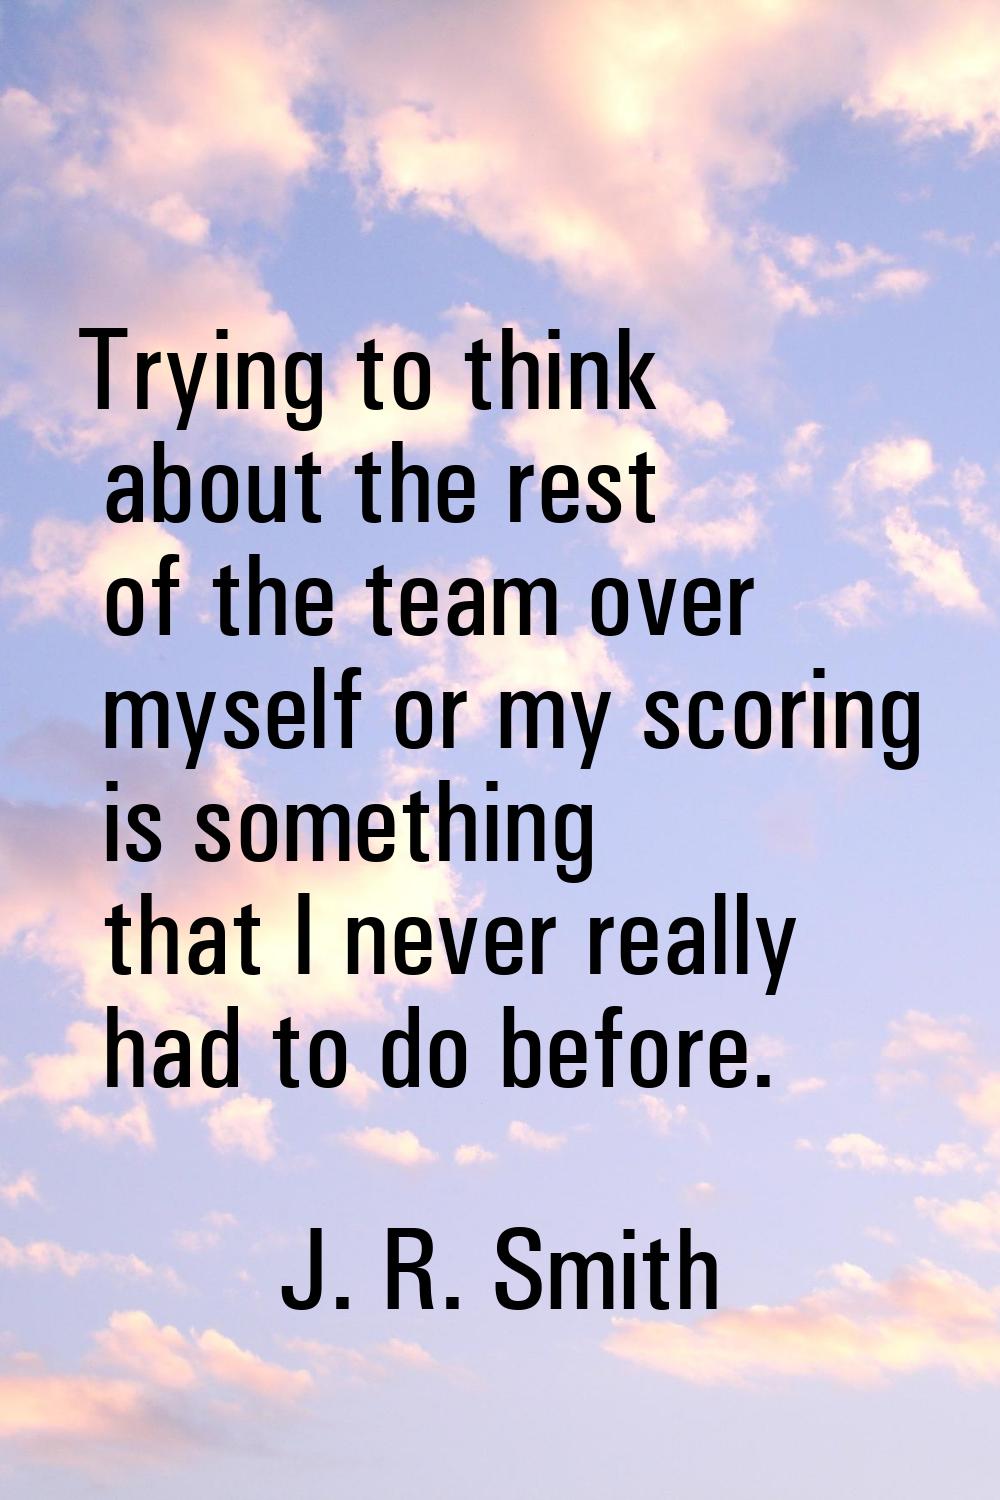 Trying to think about the rest of the team over myself or my scoring is something that I never real